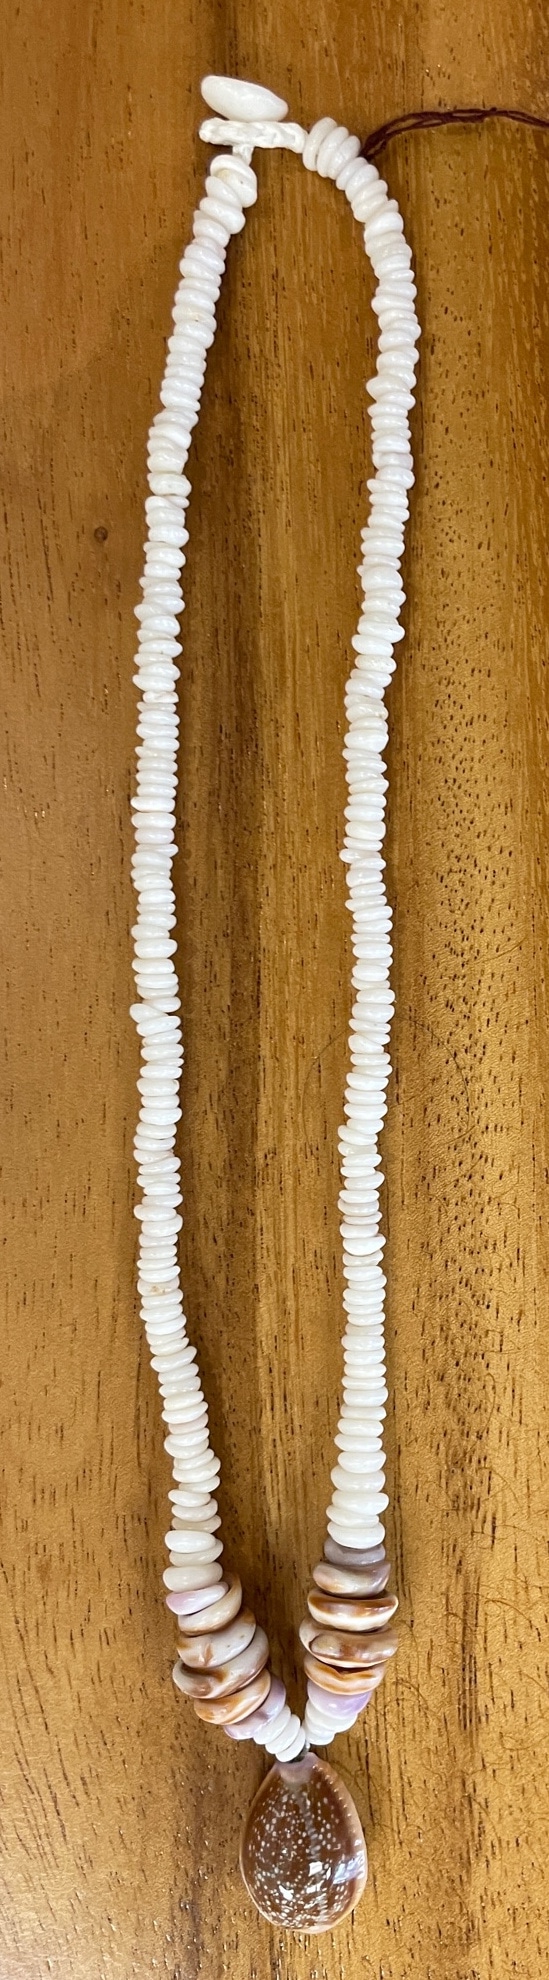 Take Me to the Beach Puka Pearl Necklace — Cape Cod Chokers